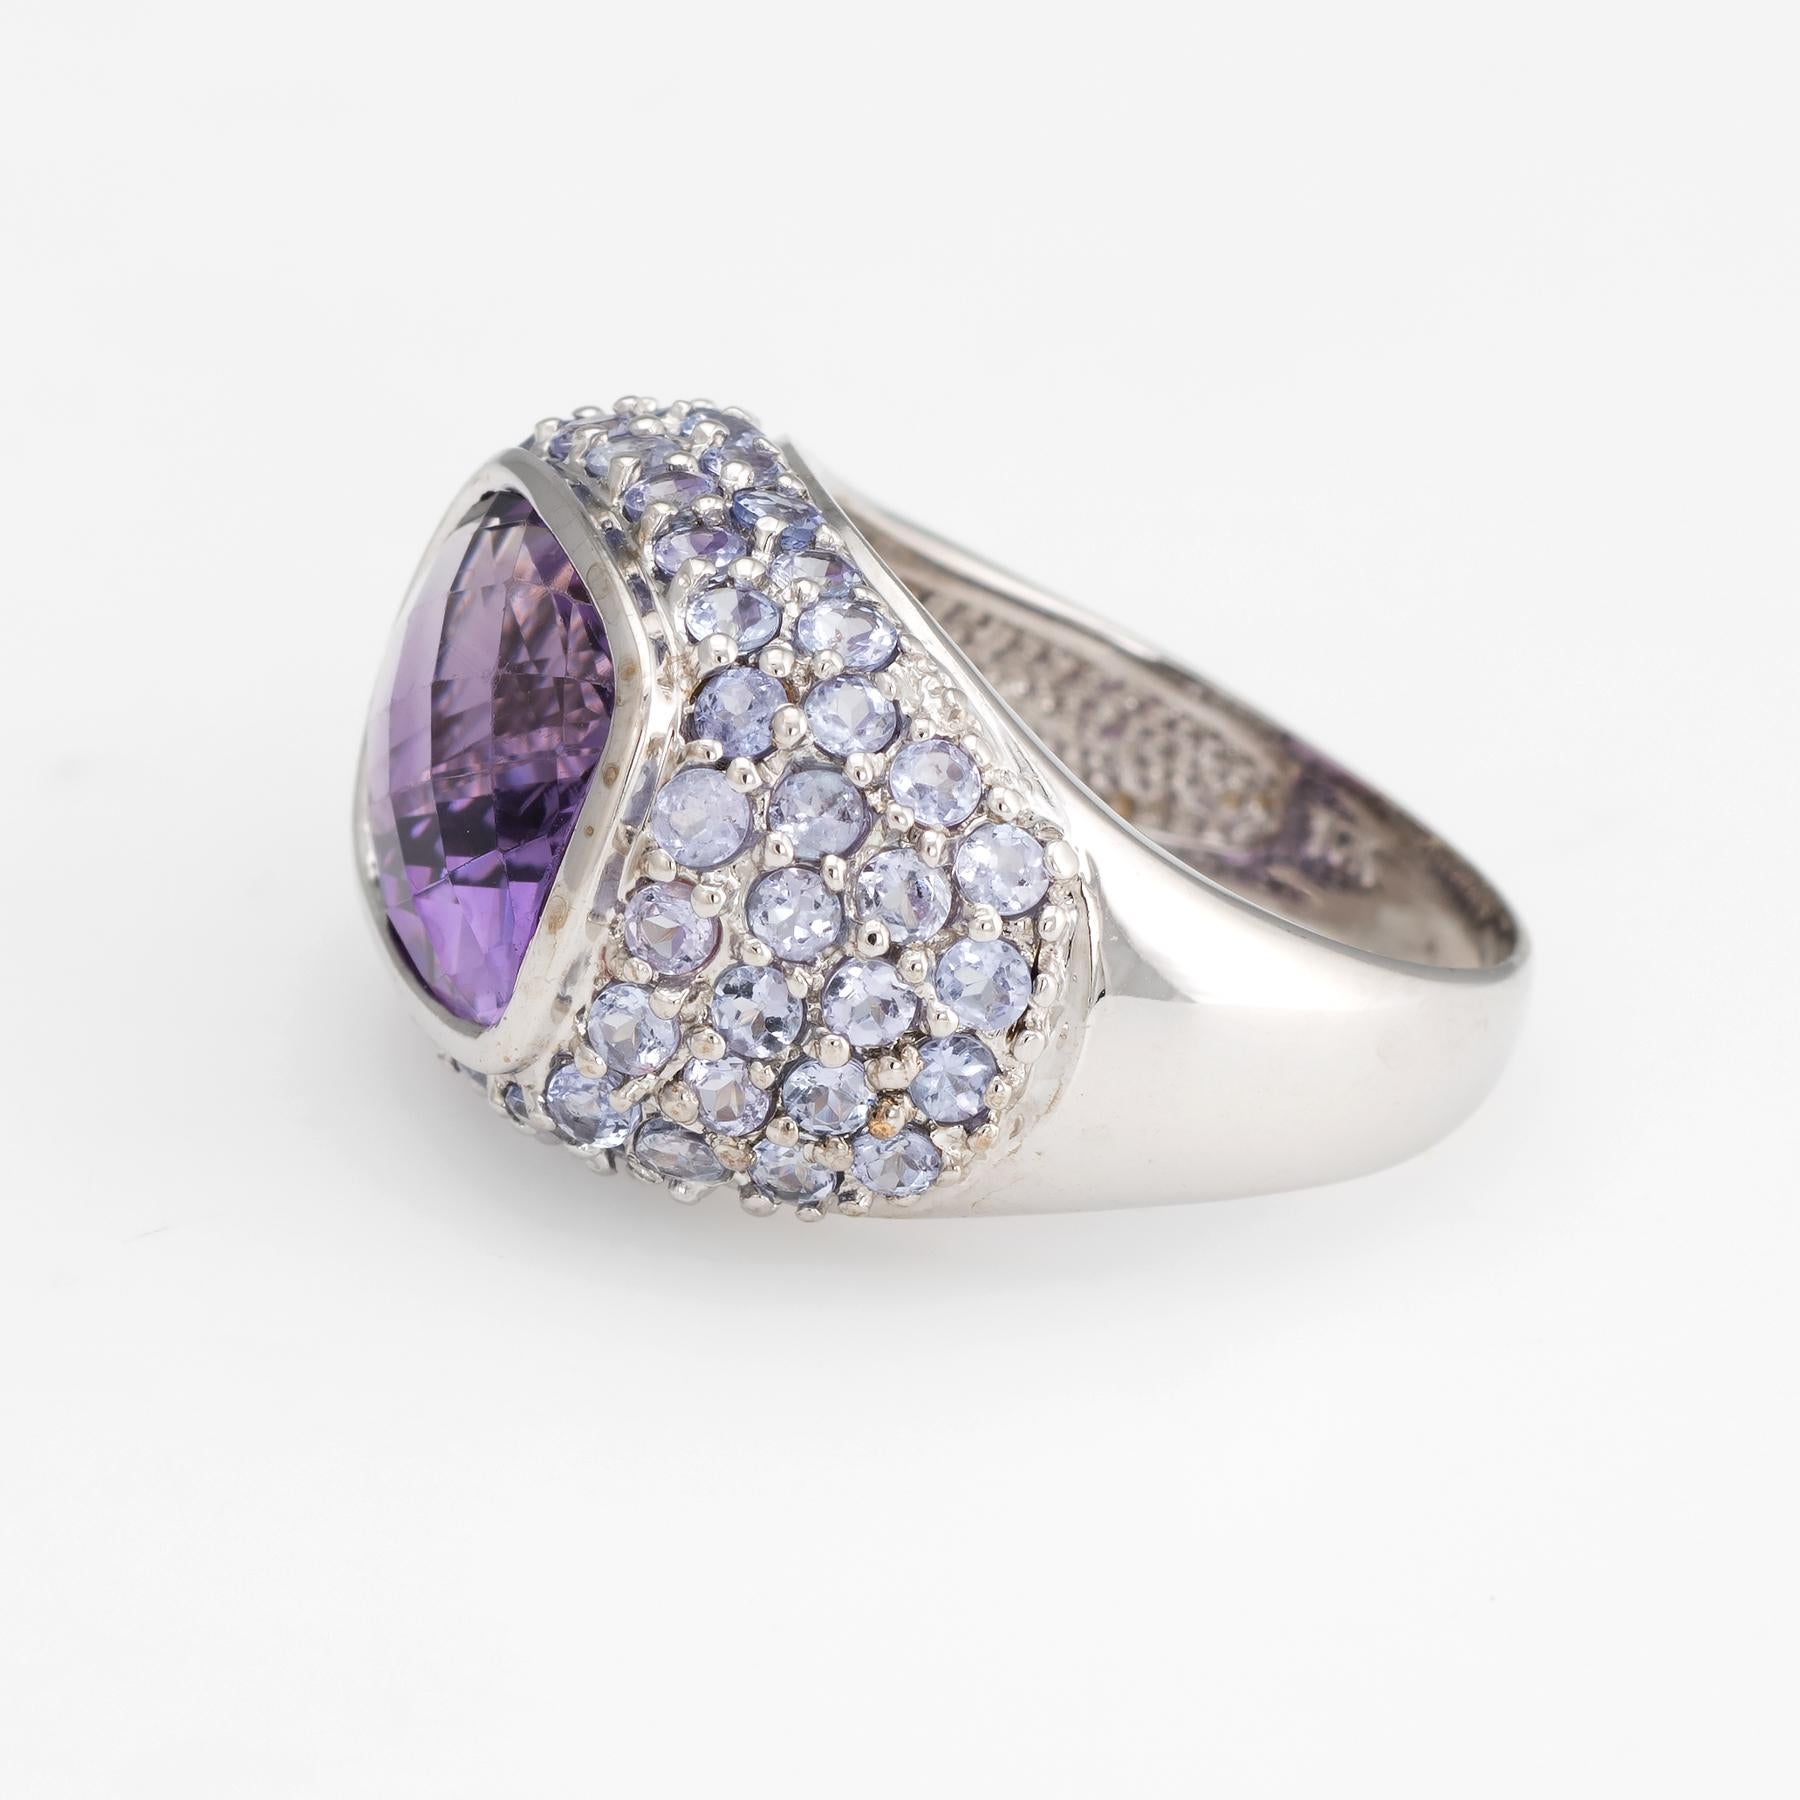 Cushion Cut Amethyst Iolite Ring 10k White Gold Vintage East West Cocktail Estate Jewelry